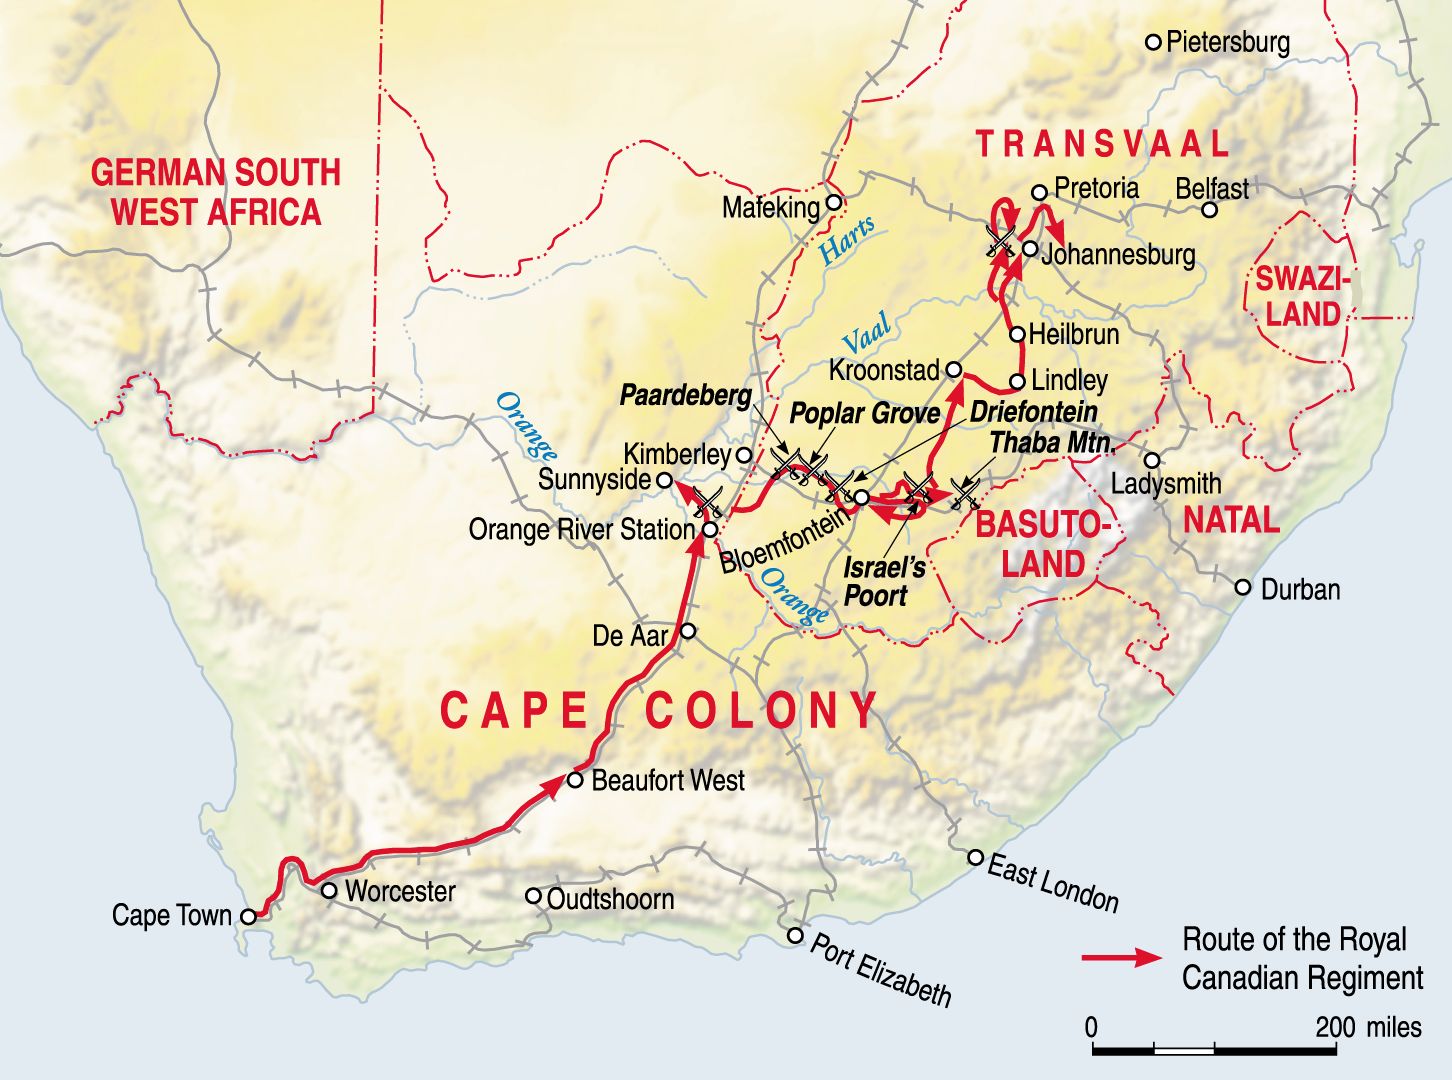 The route taken by the Canadian forces in South Africa in the winter of 1899-1900.